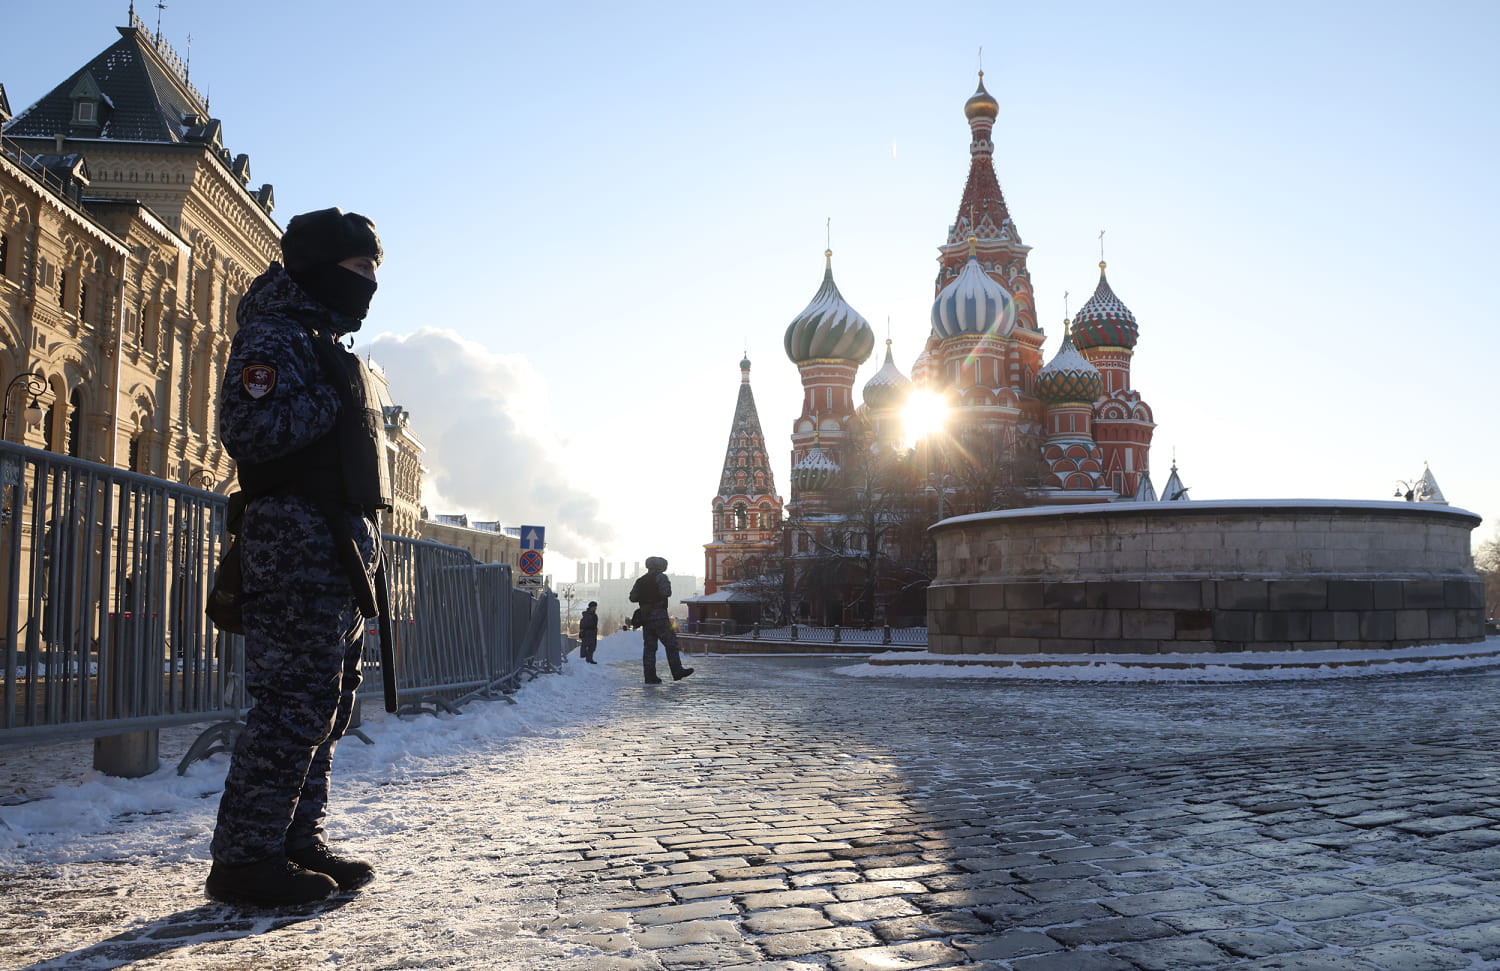 U.S. warns of imminent Moscow attack by ‘extremists,’ urges citizens to avoid crowds